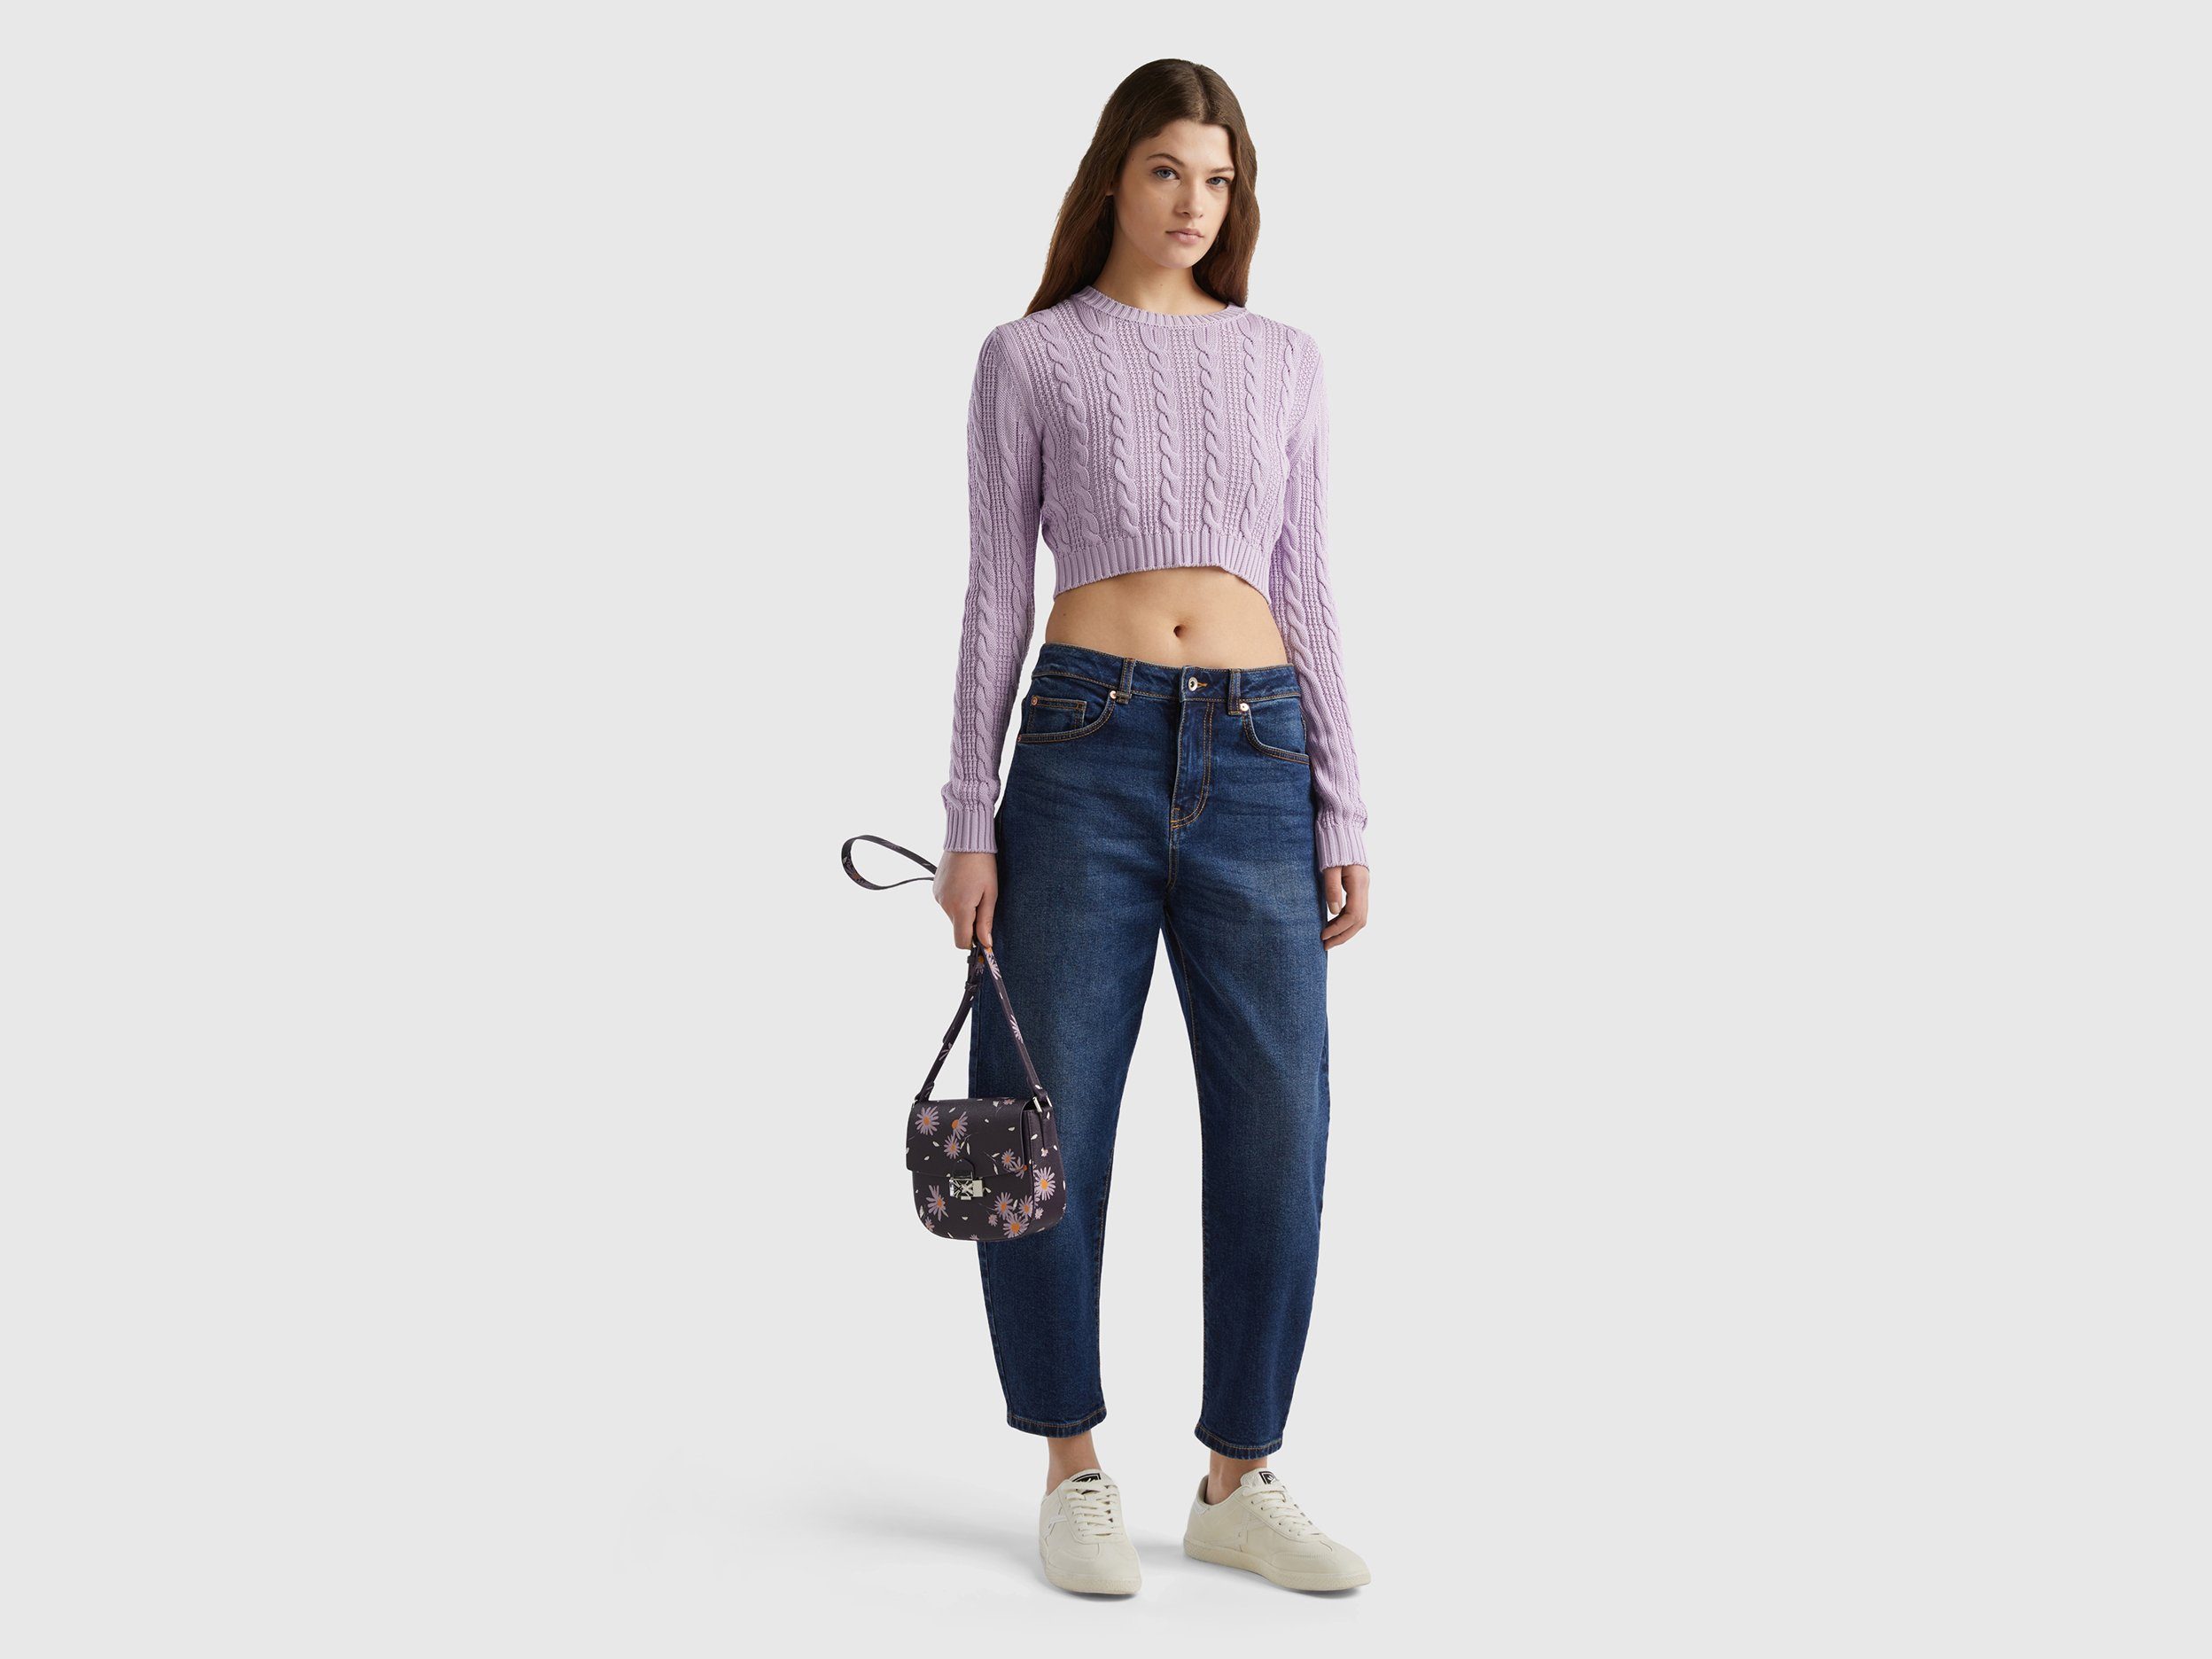 United Colors of Benetton Trui met ronde hals cropped